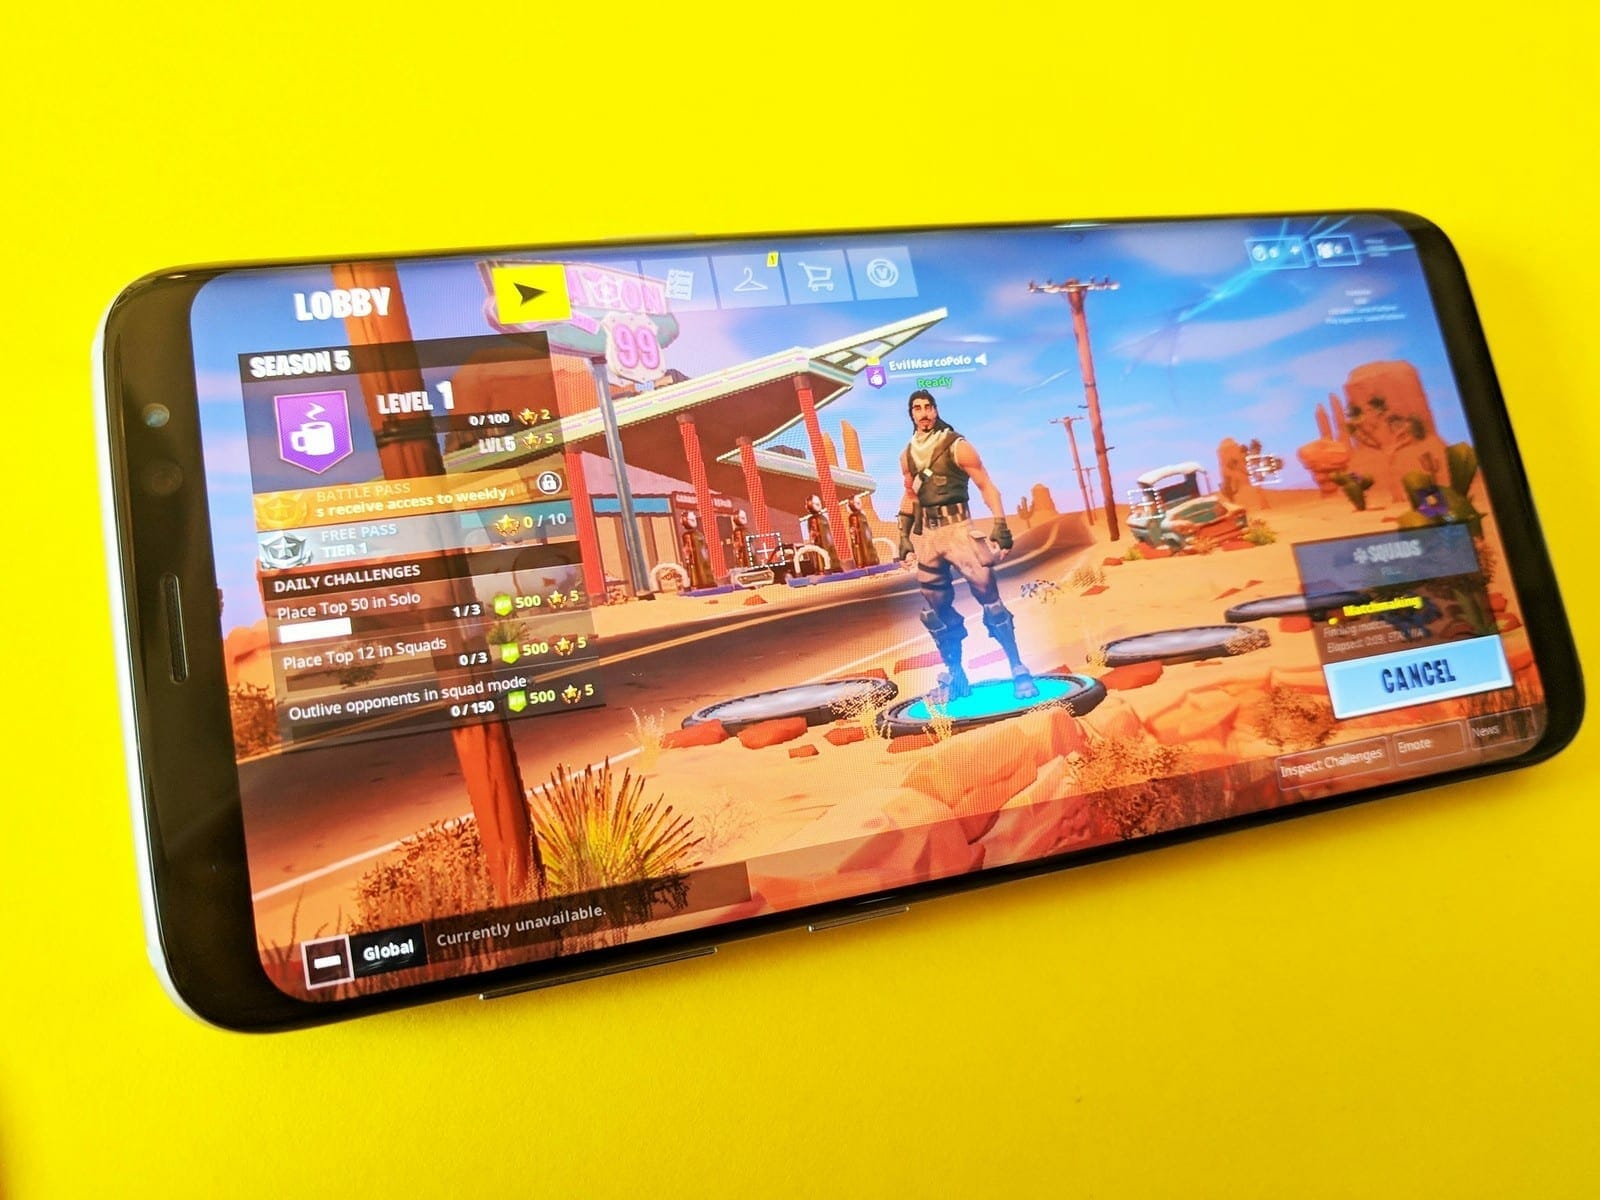 How to see FPS and enable 60 FPS on Fortnite Mobile ... - 1600 x 1200 jpeg 190kB